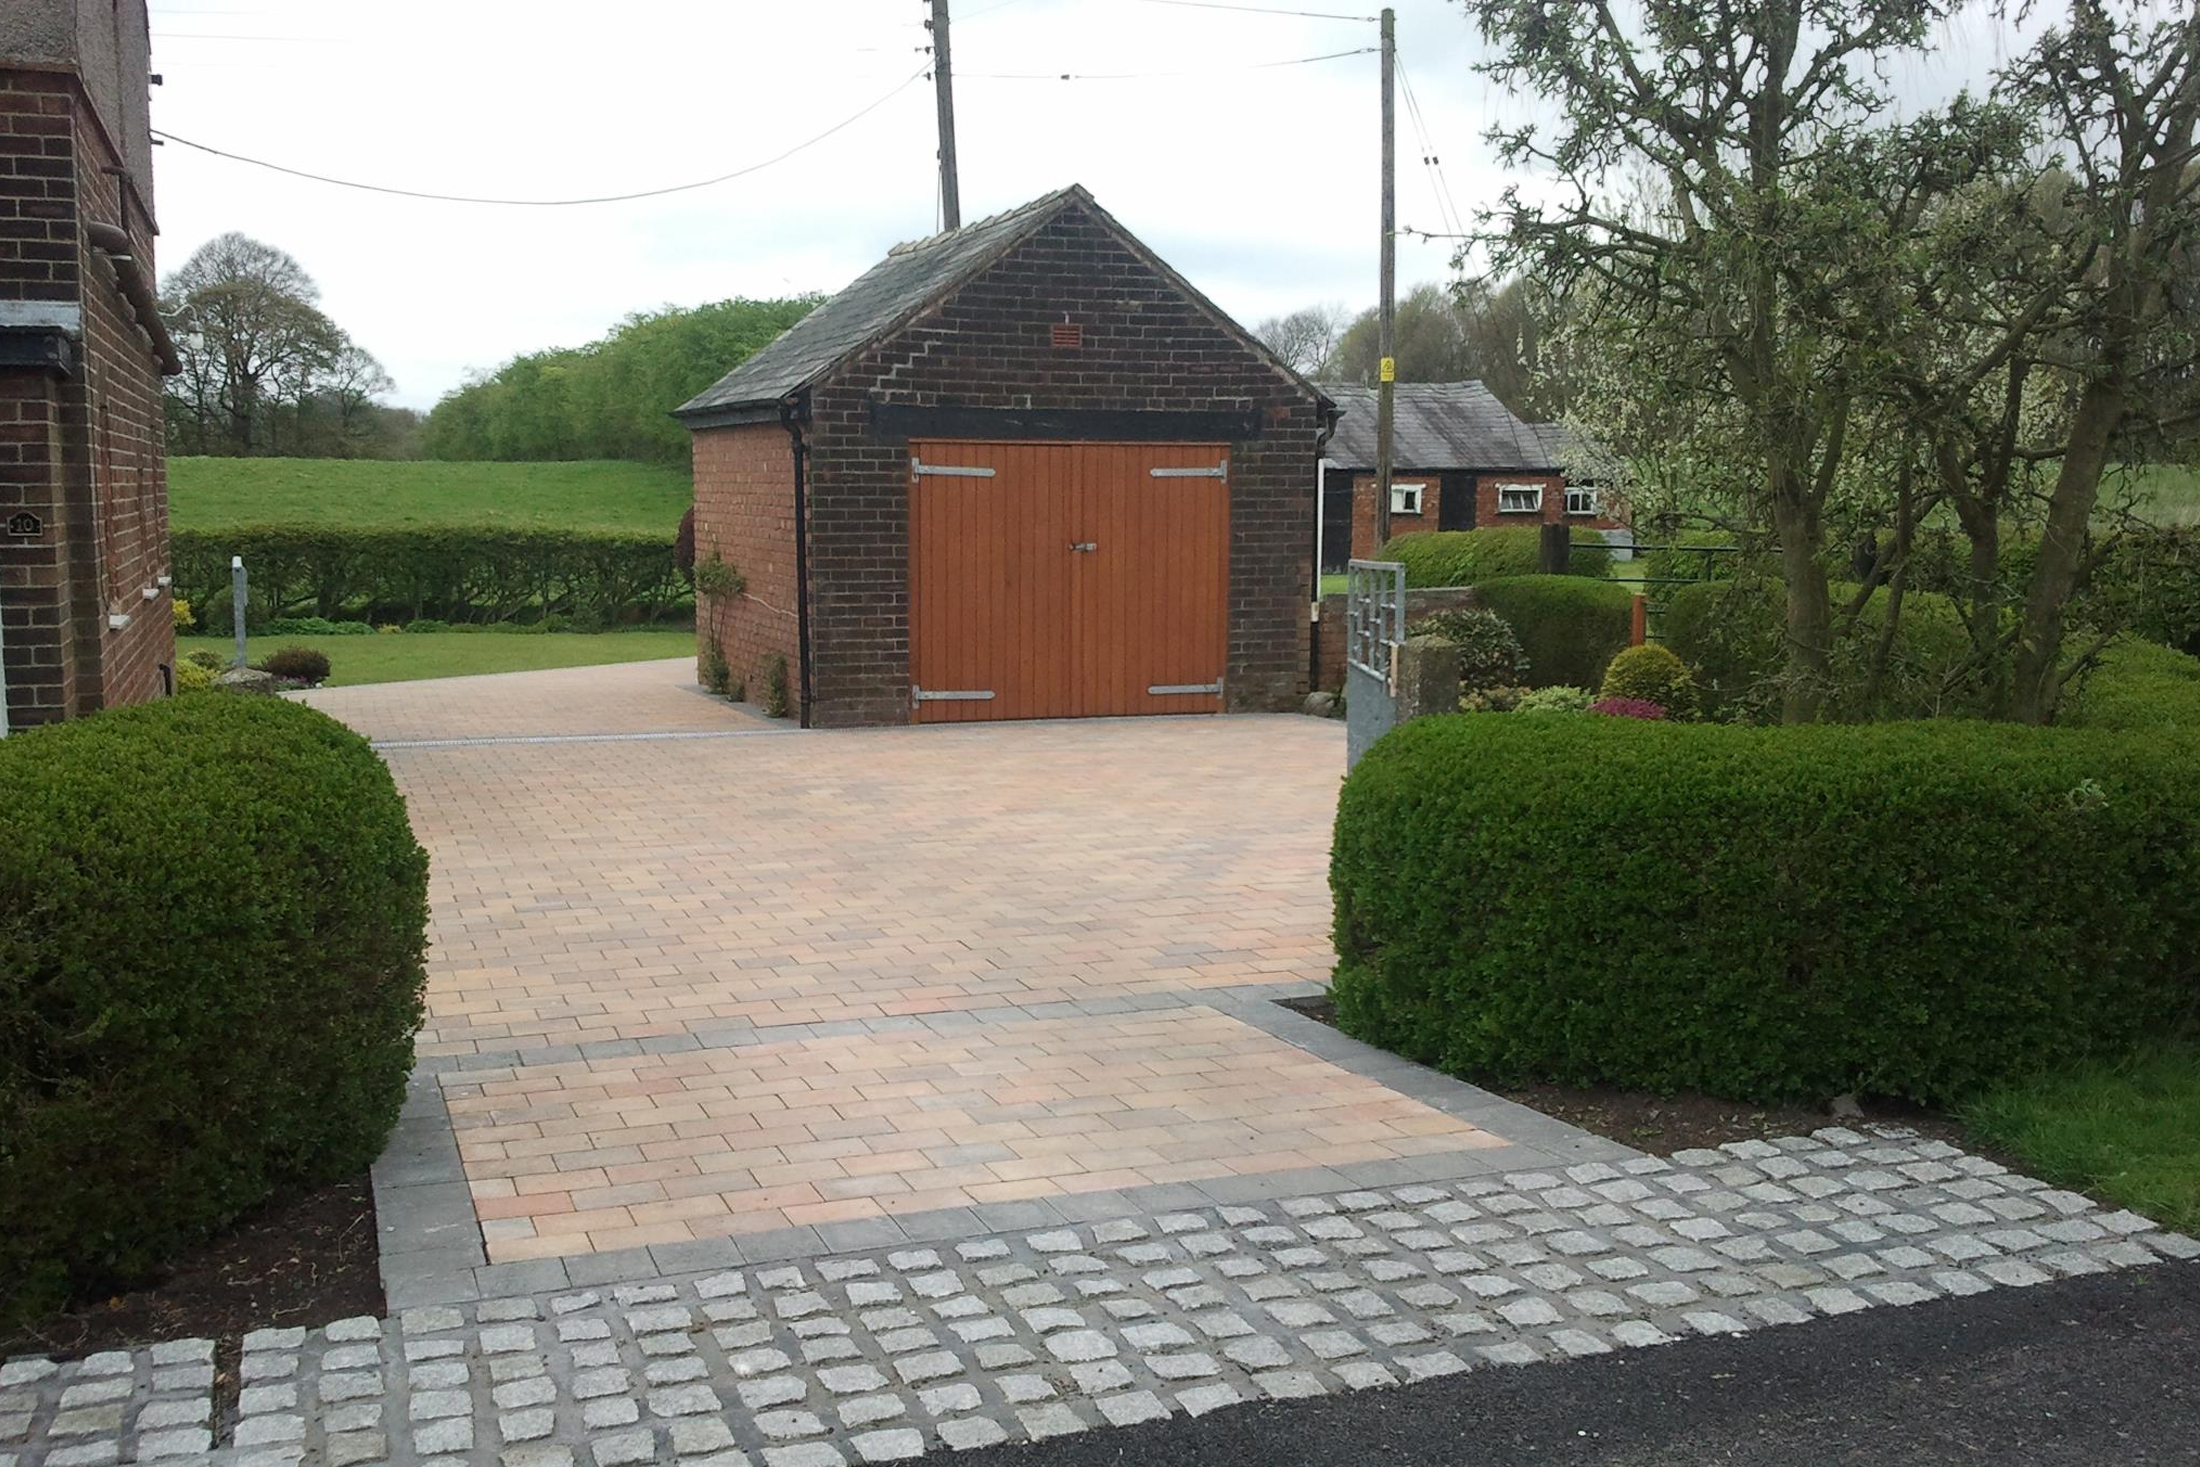 construction & landscaping in Chorley